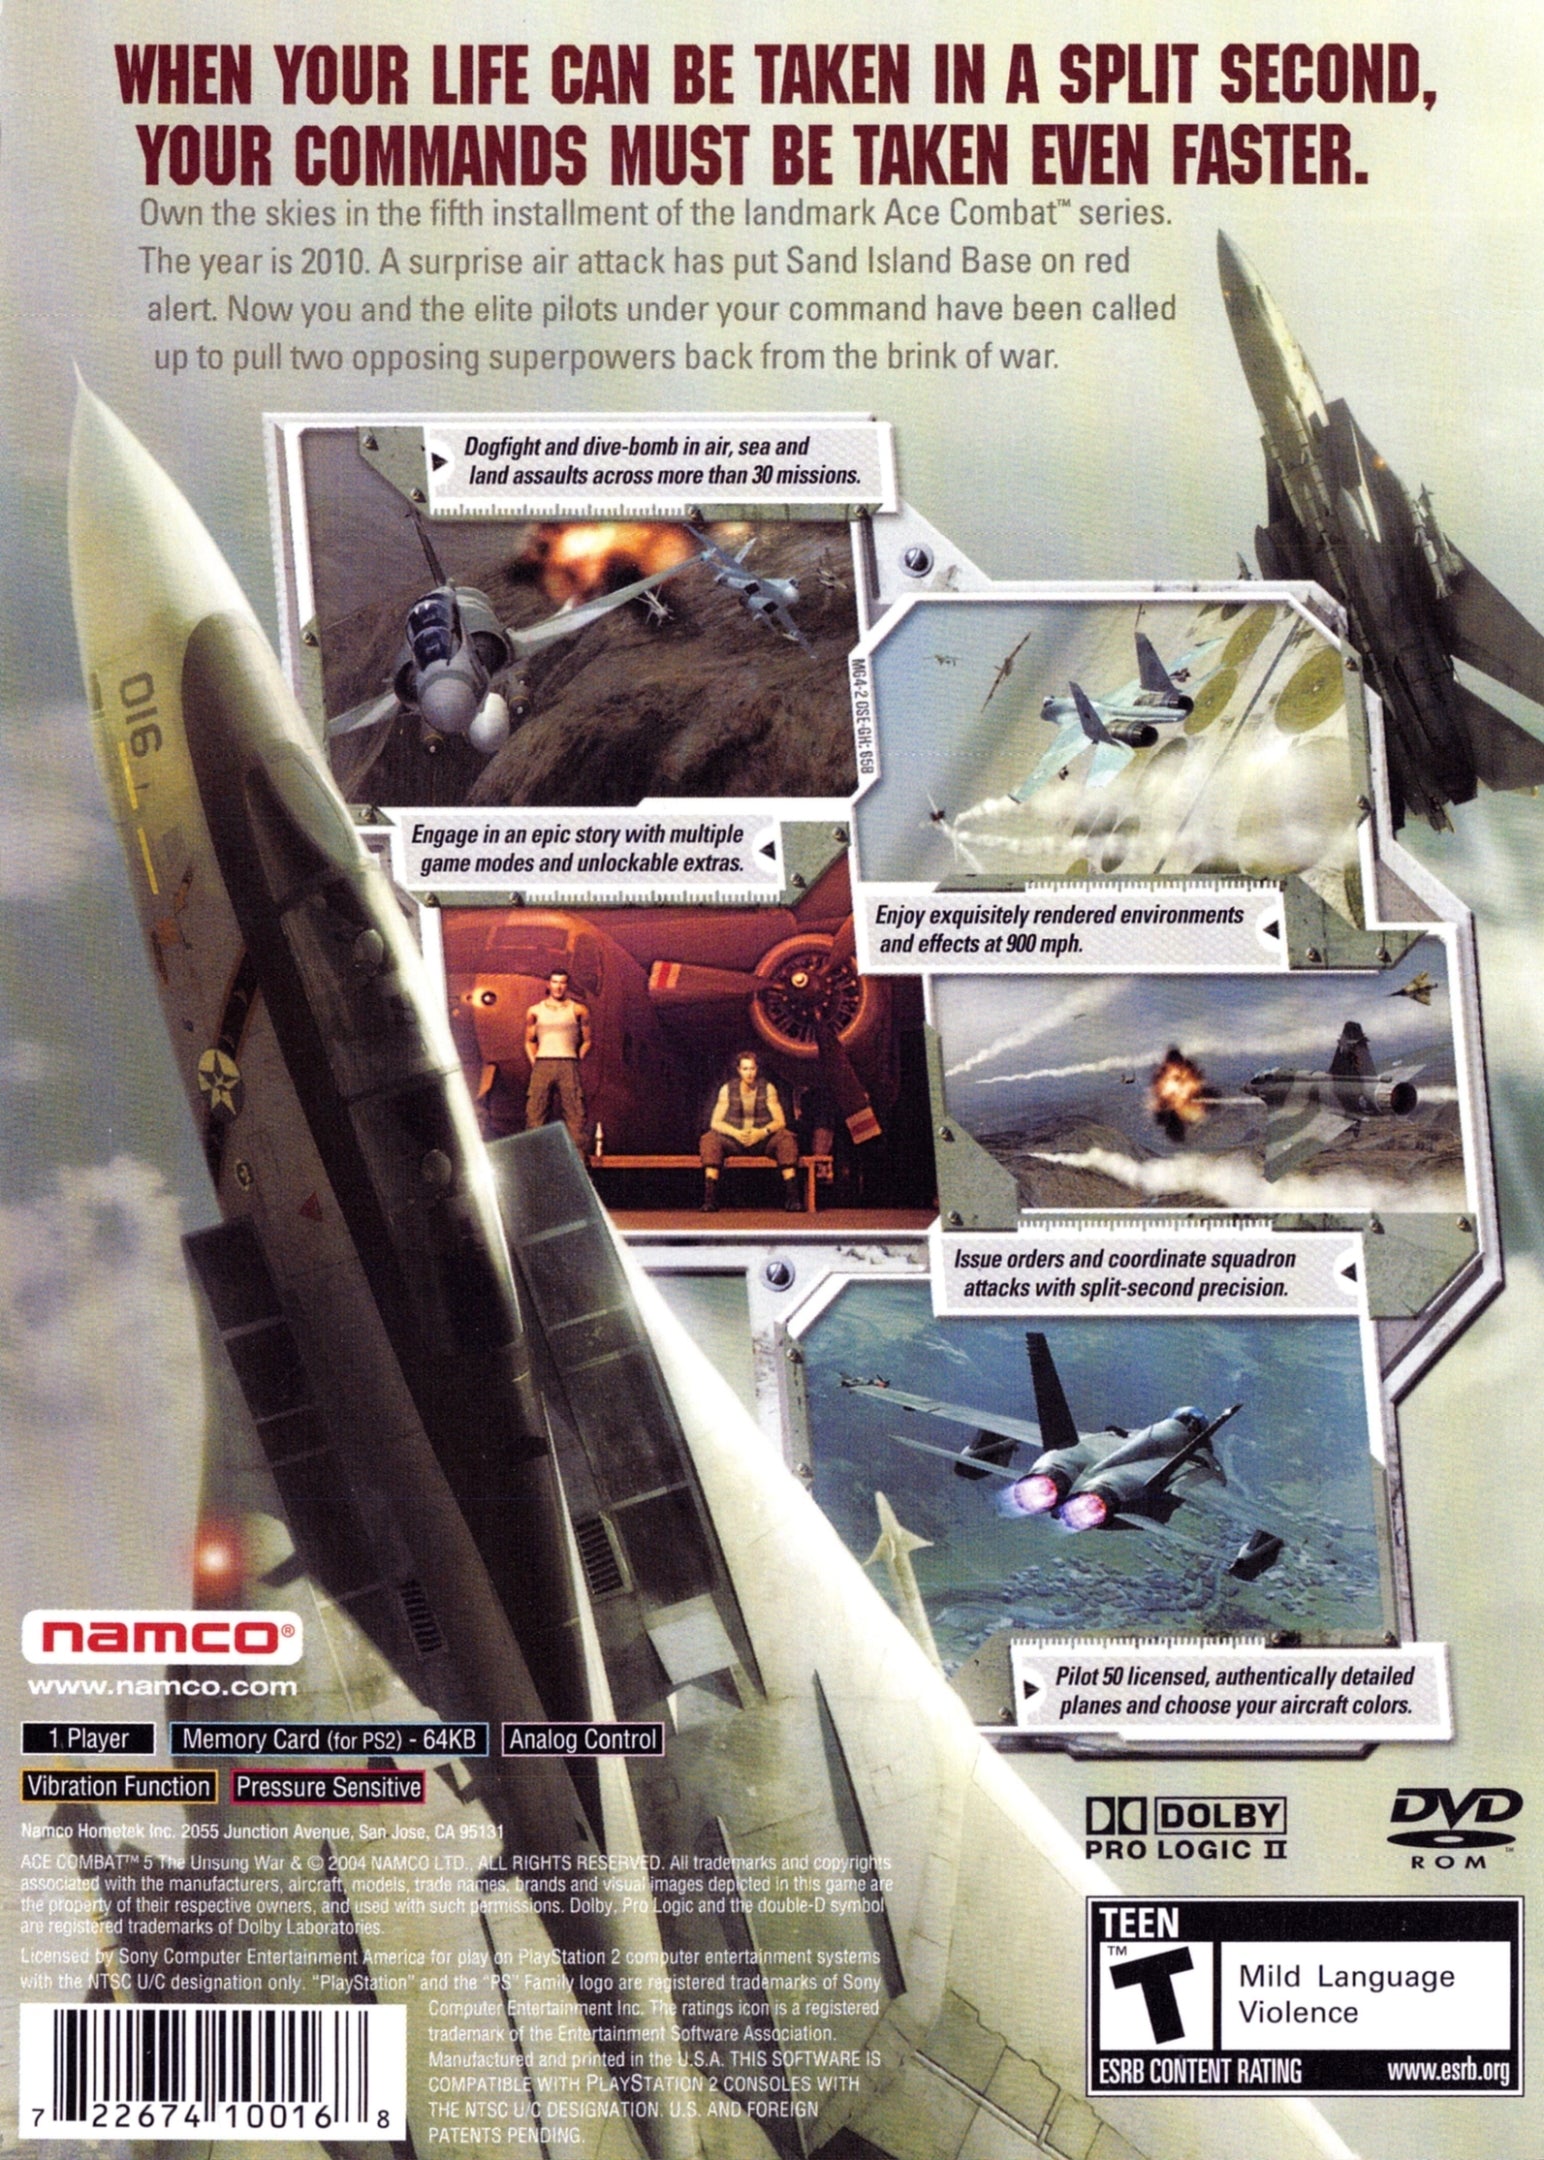 Ace Combat 5: The Unsung War - PlayStation 2 (PS2) Game